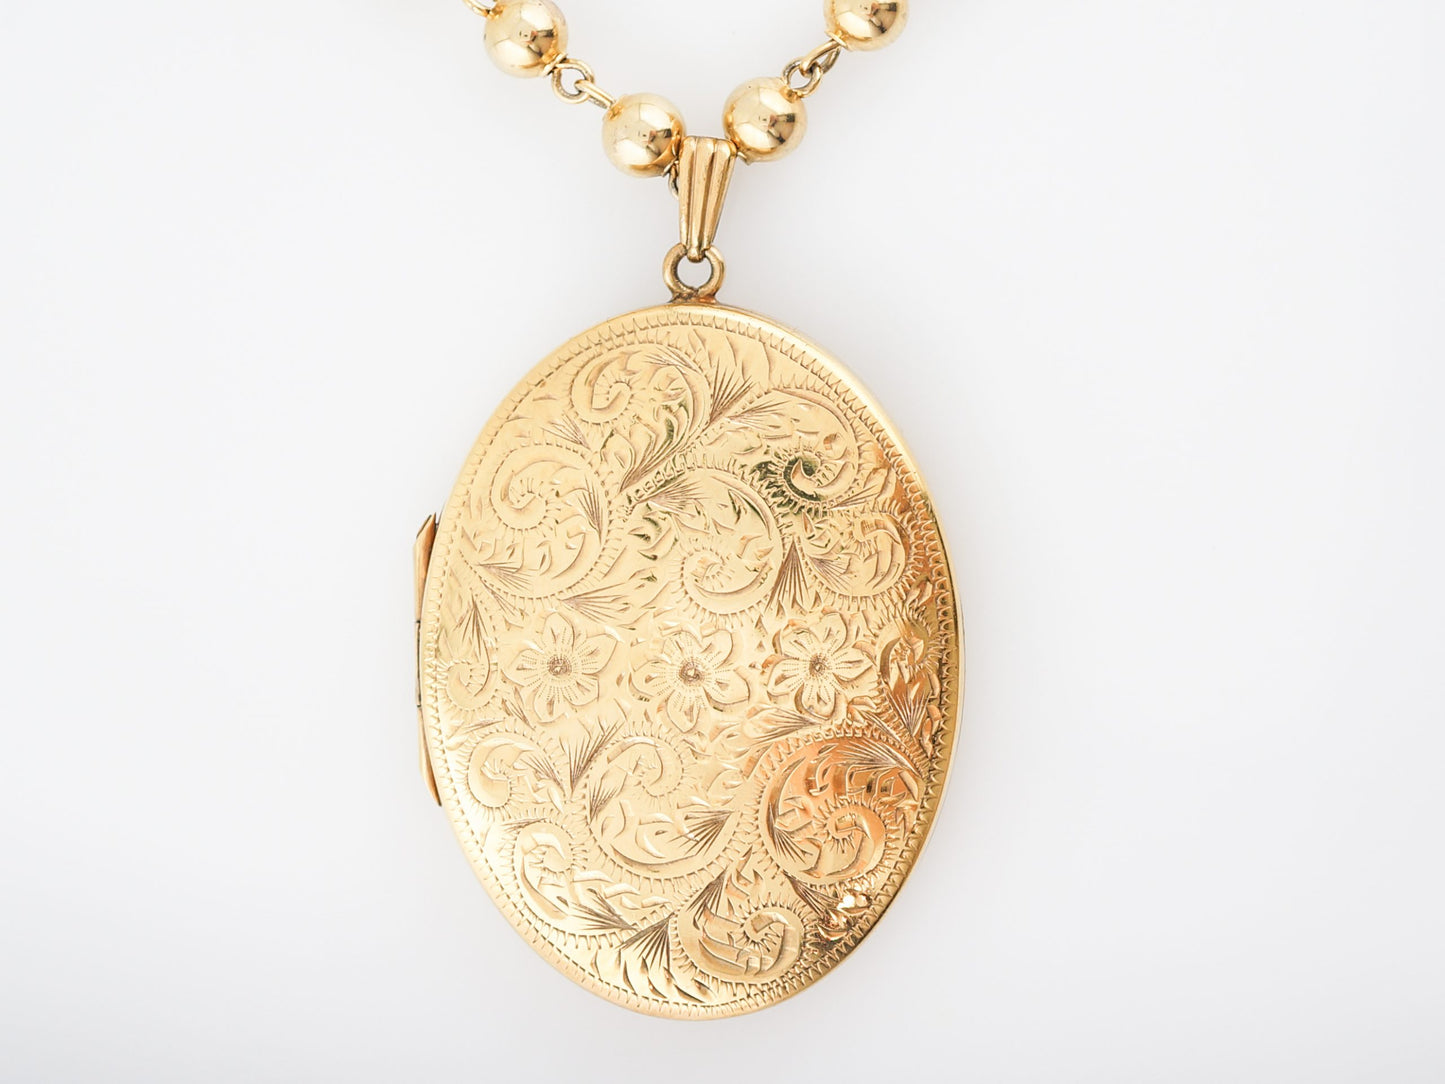 Antique Victorian Necklace & Large Oval Locket in 14k Yellow Gold